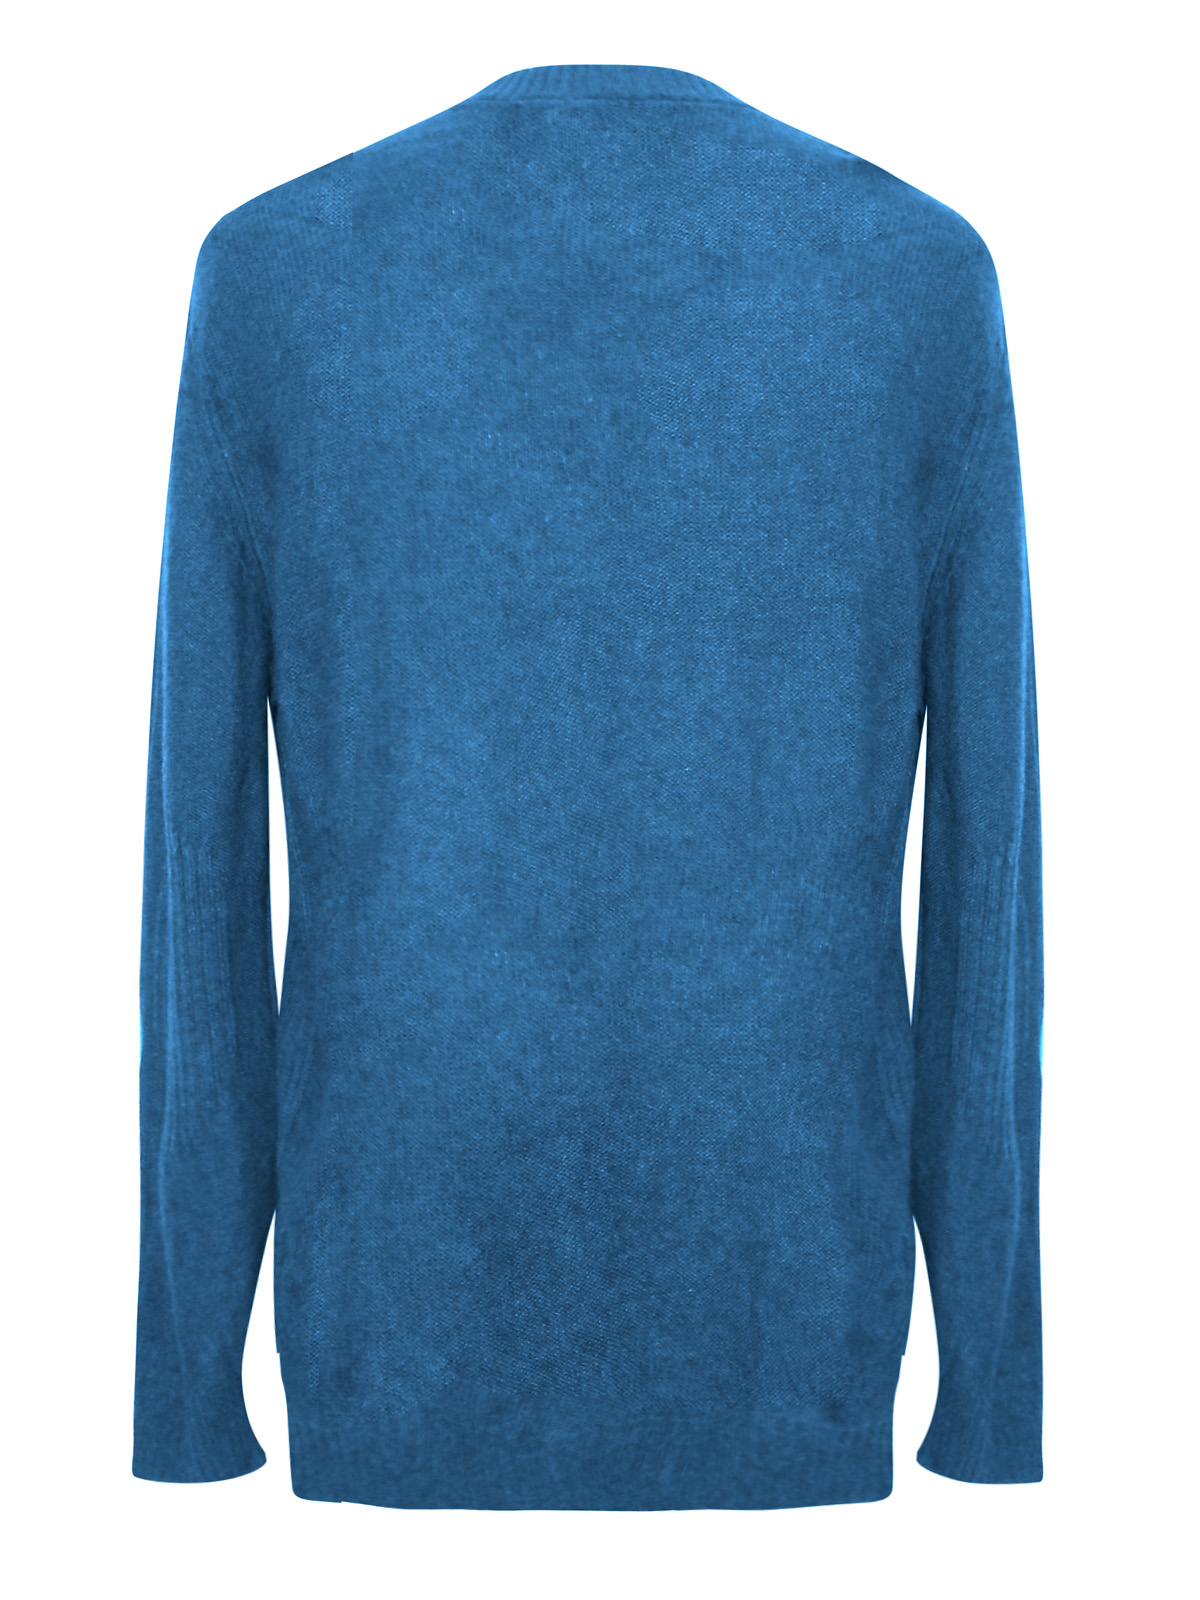 N3XT TEAL Crew Neck Textured Knit Jumper with Wool - Size Large to 3XL